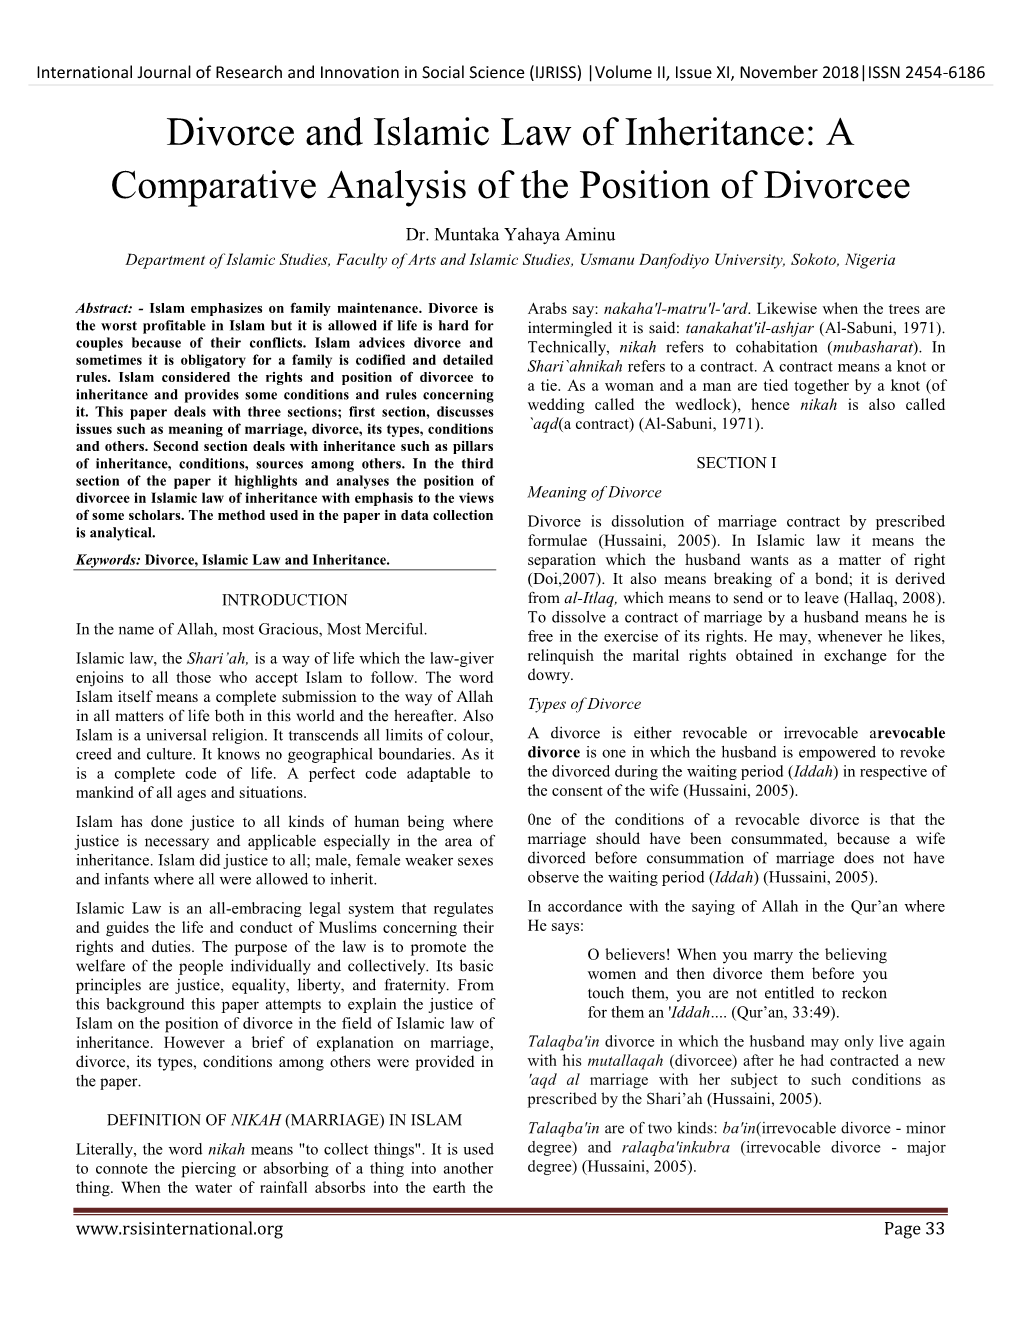 Divorce and Islamic Law of Inheritance: a Comparative Analysis of the Position of Divorcee